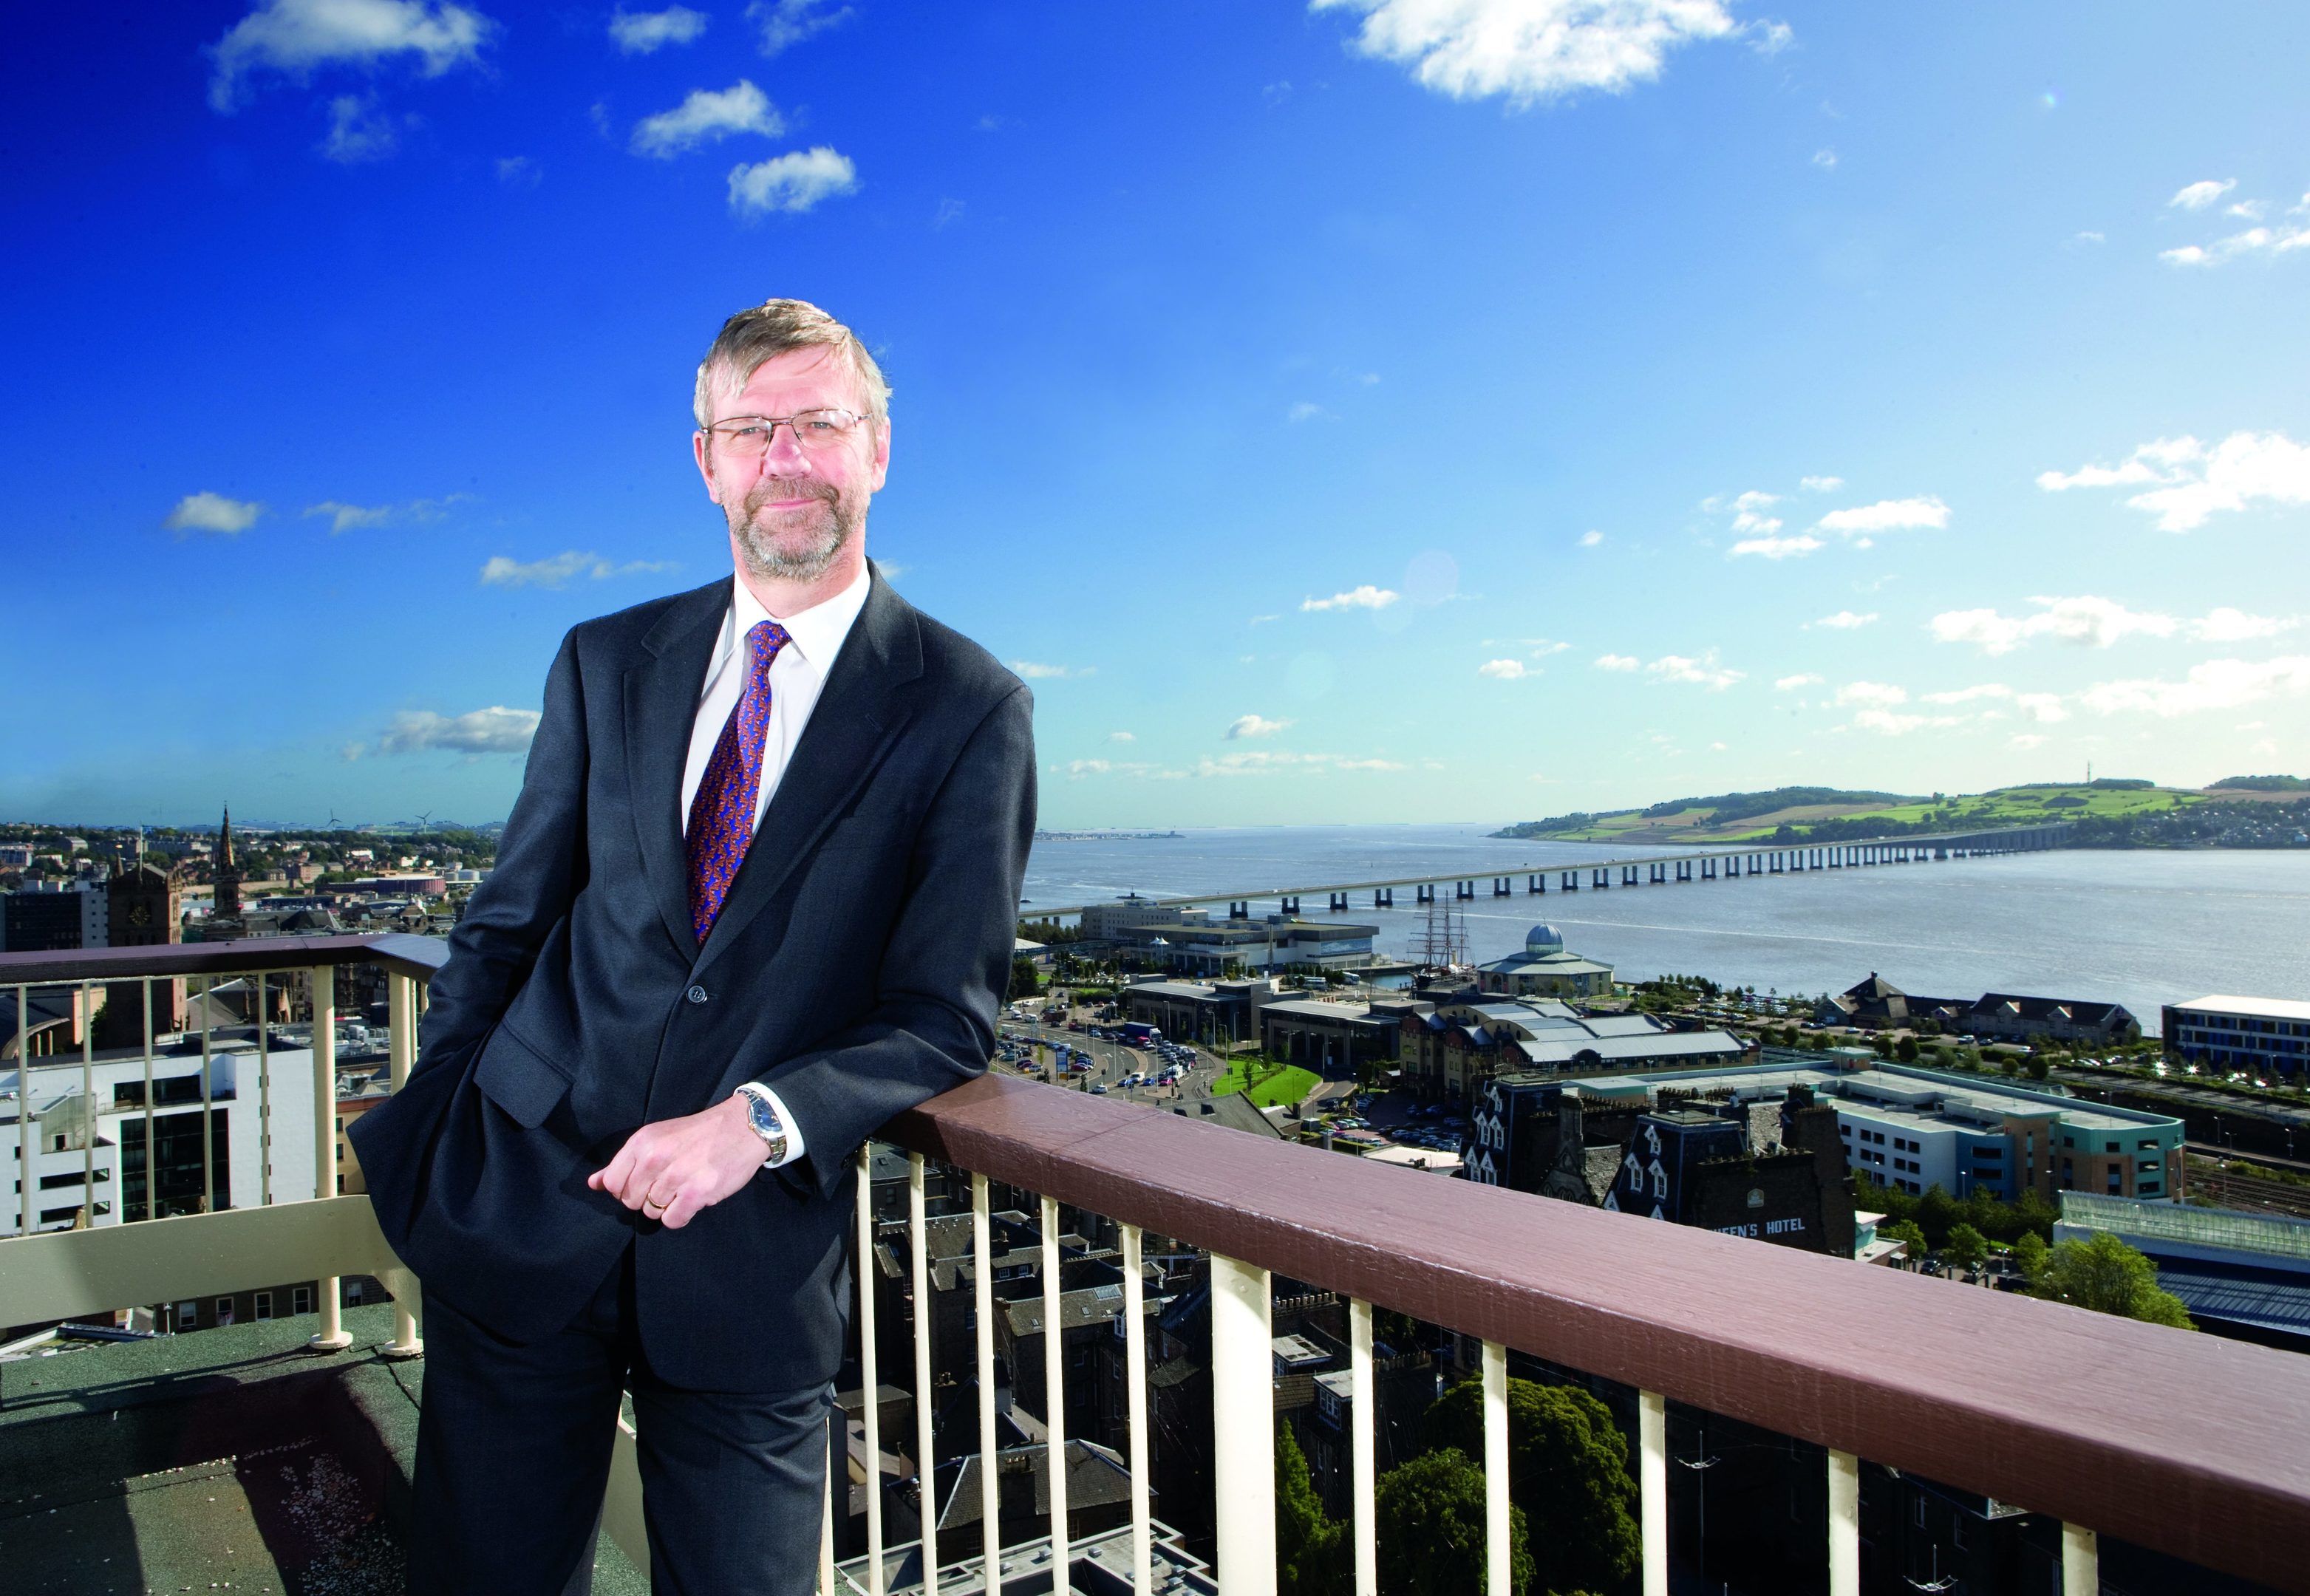 Professor Sir Pete Downes, Principal and Vice Chancellor of Dundee University